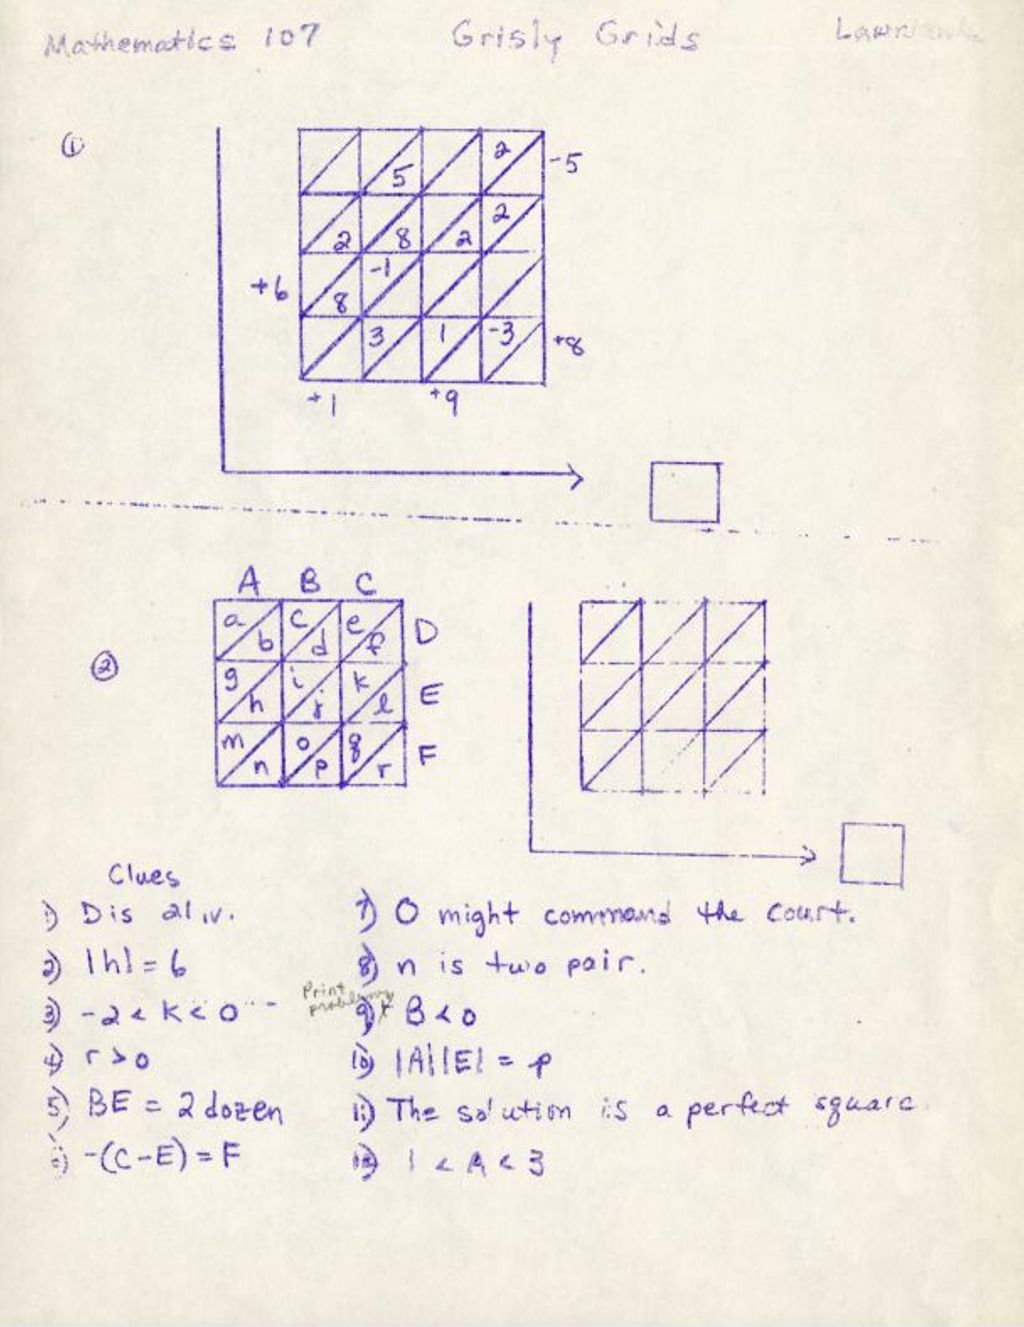 Miniature of Grisly Grids (math 107)